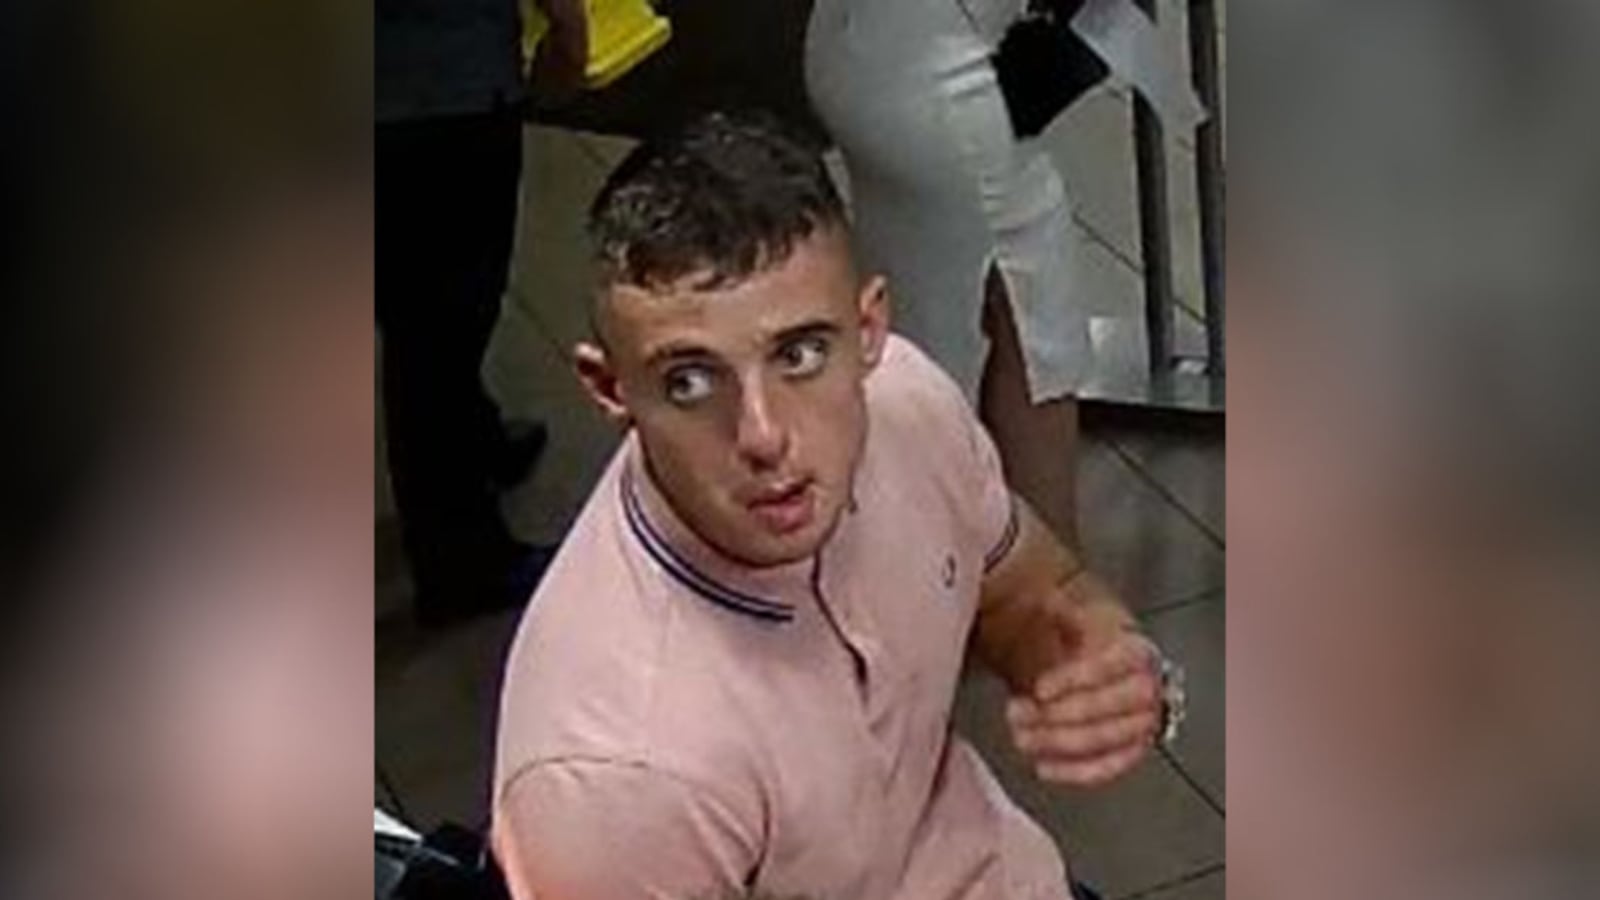 Police Release Image In Appeal Over Taxi Driver Assault The Irish News